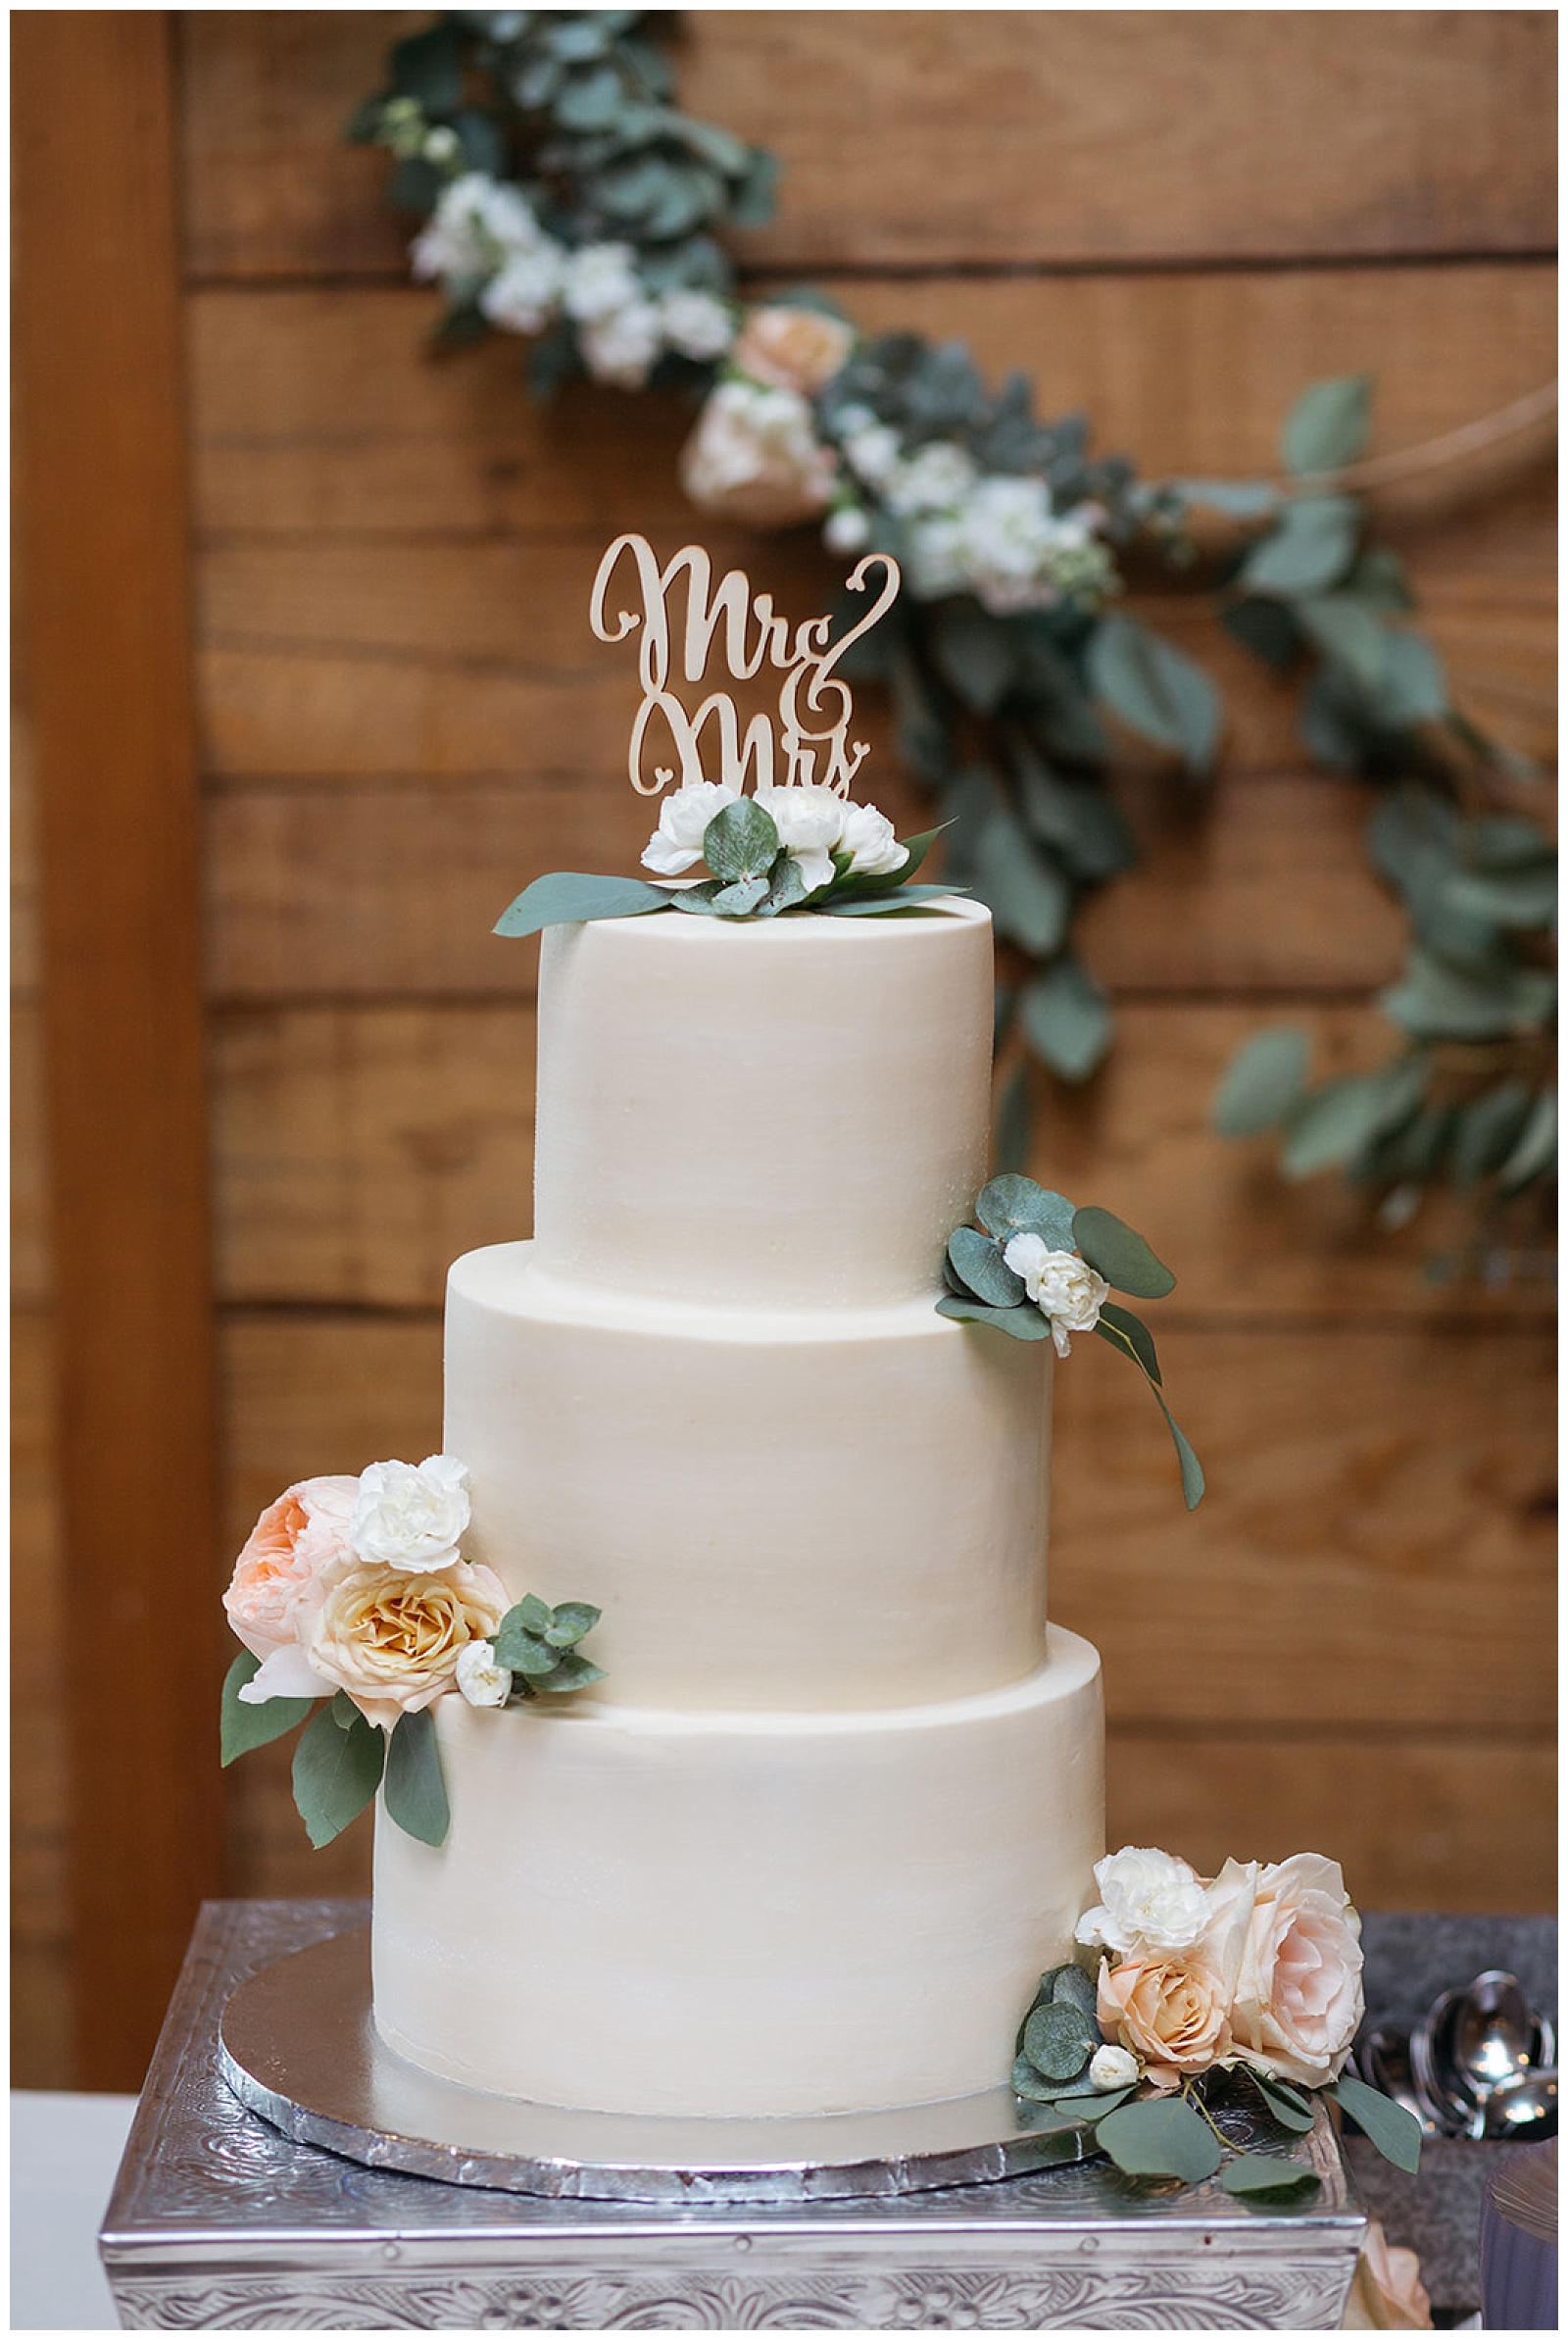 Sage and Peach decorated cake | Simple elegance at Emery's Buffalo Creek, Bellville, Texas 